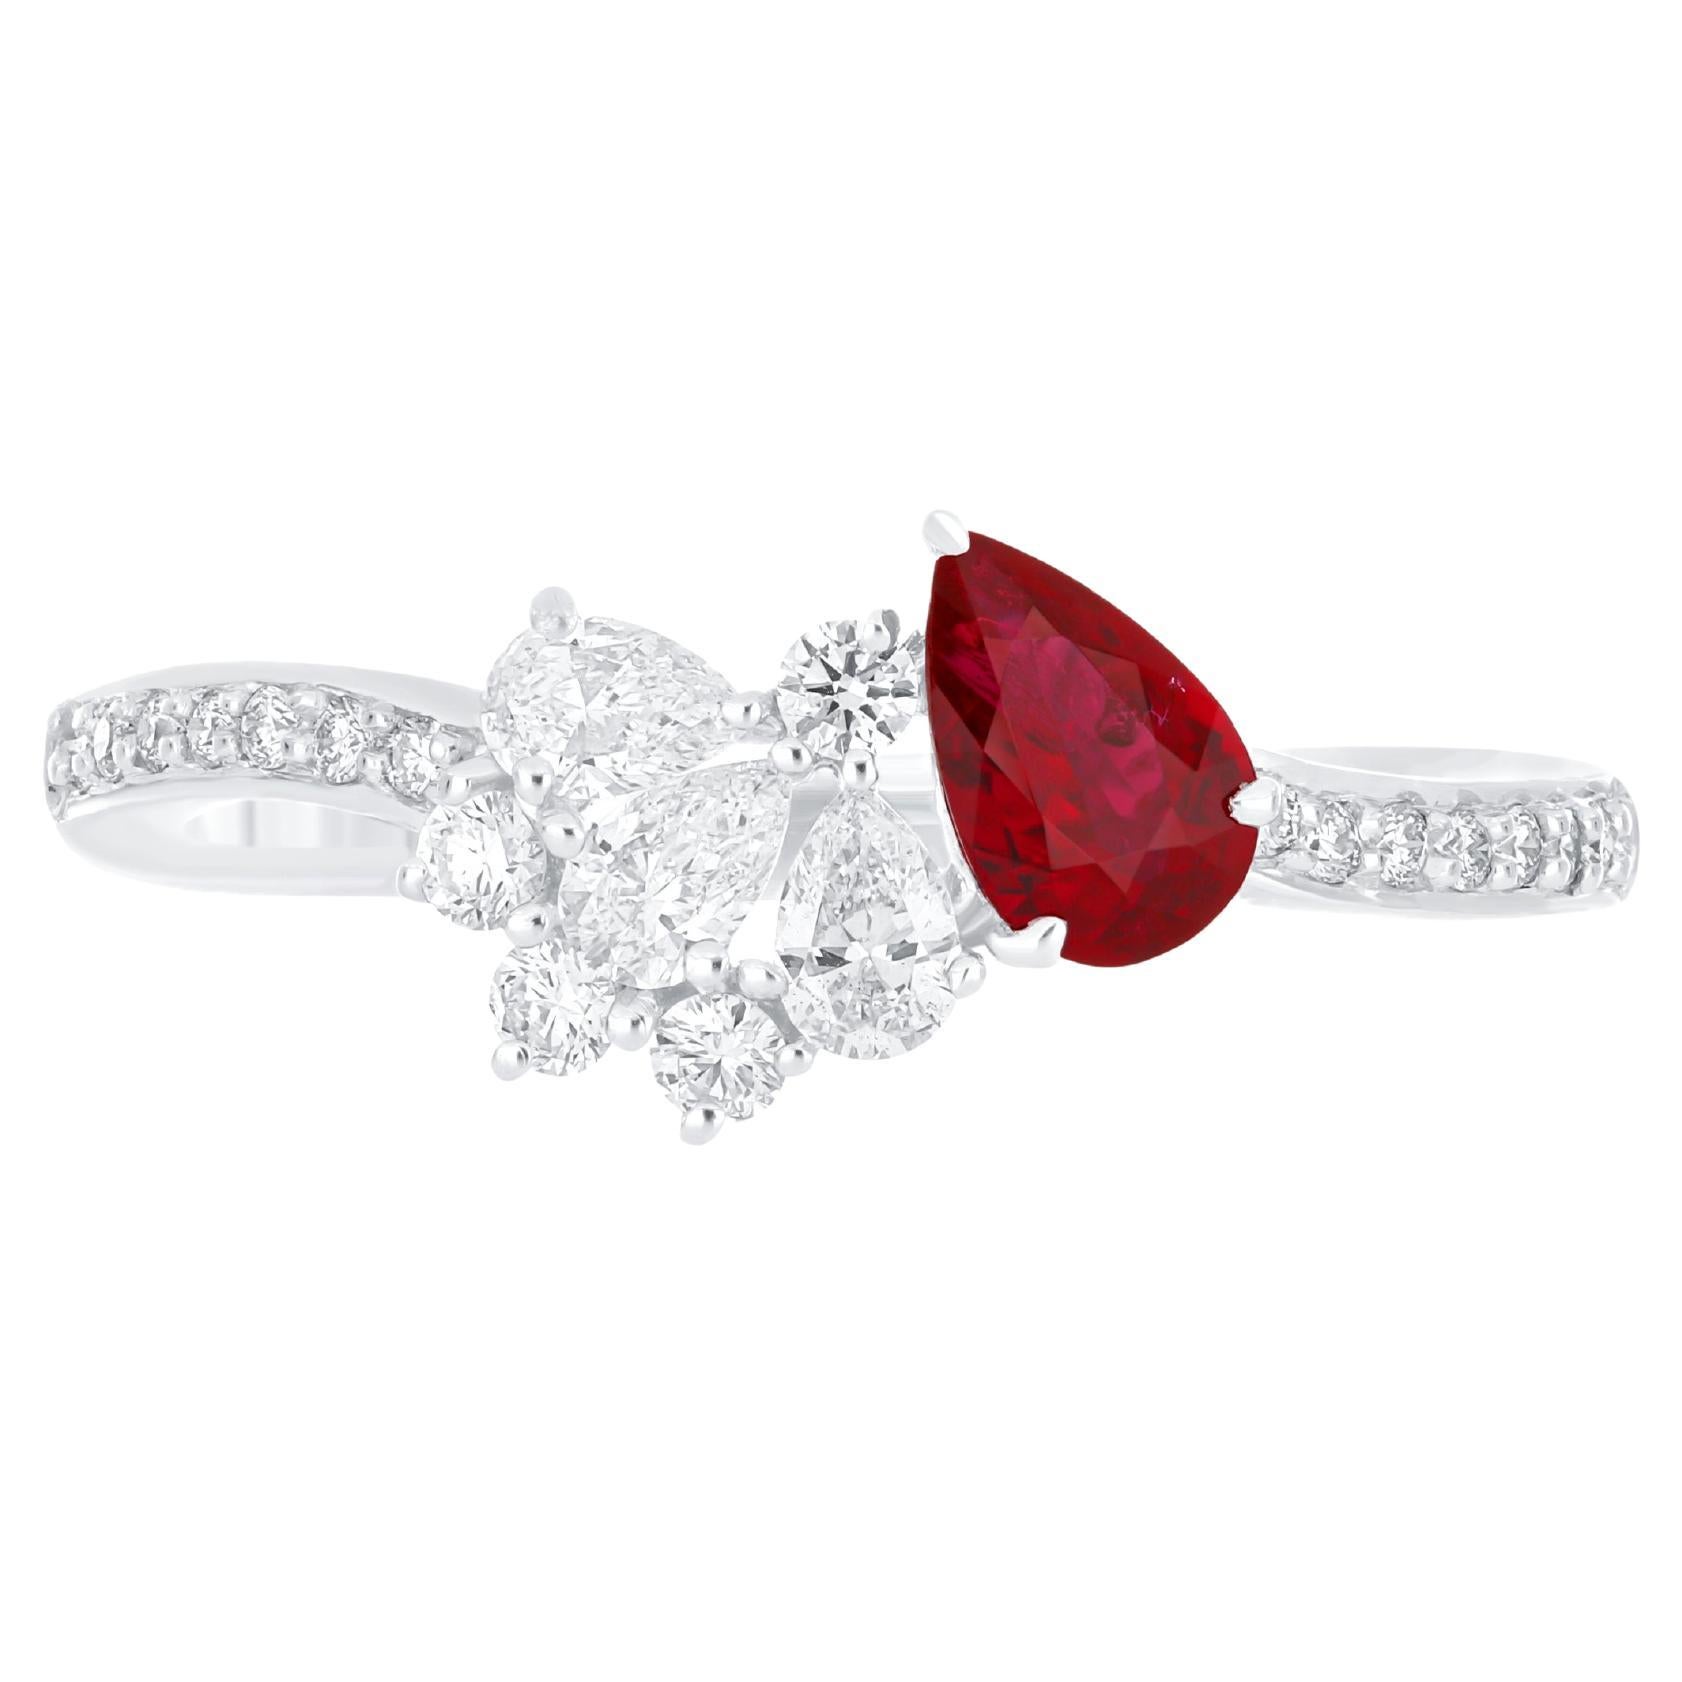 0.36Cts Ruby Mozambique and Diamond and 18 Karat White Gold Engagement Ring